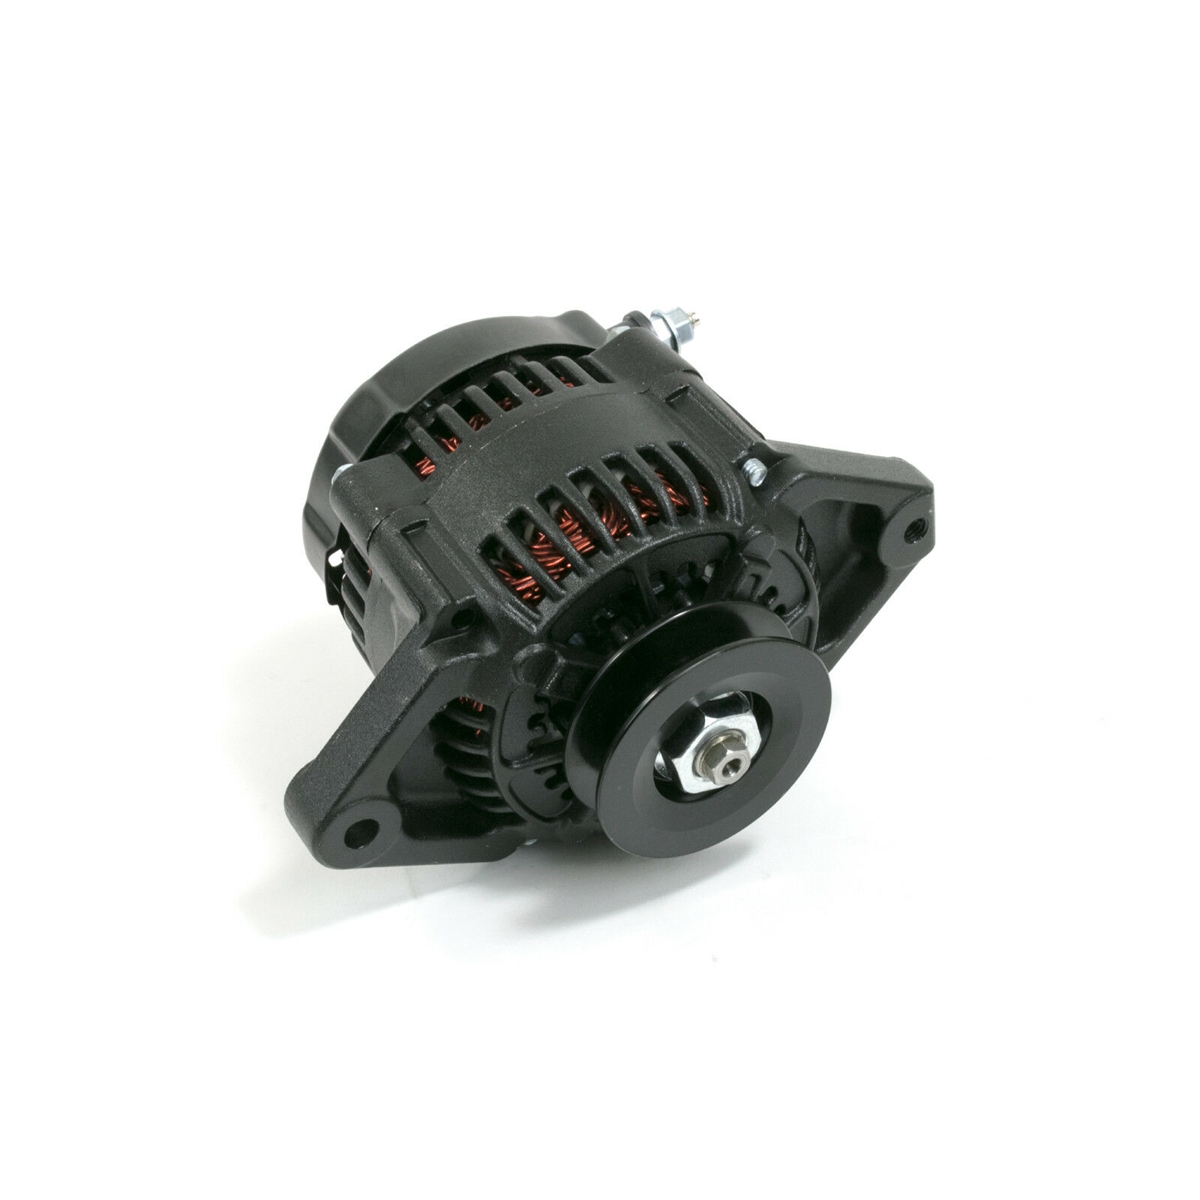 COMPATIBLE WITH CHEVY MINI NEW ALTERNATOR DENSO STREET ROD RACE 1-WIRE NEW 